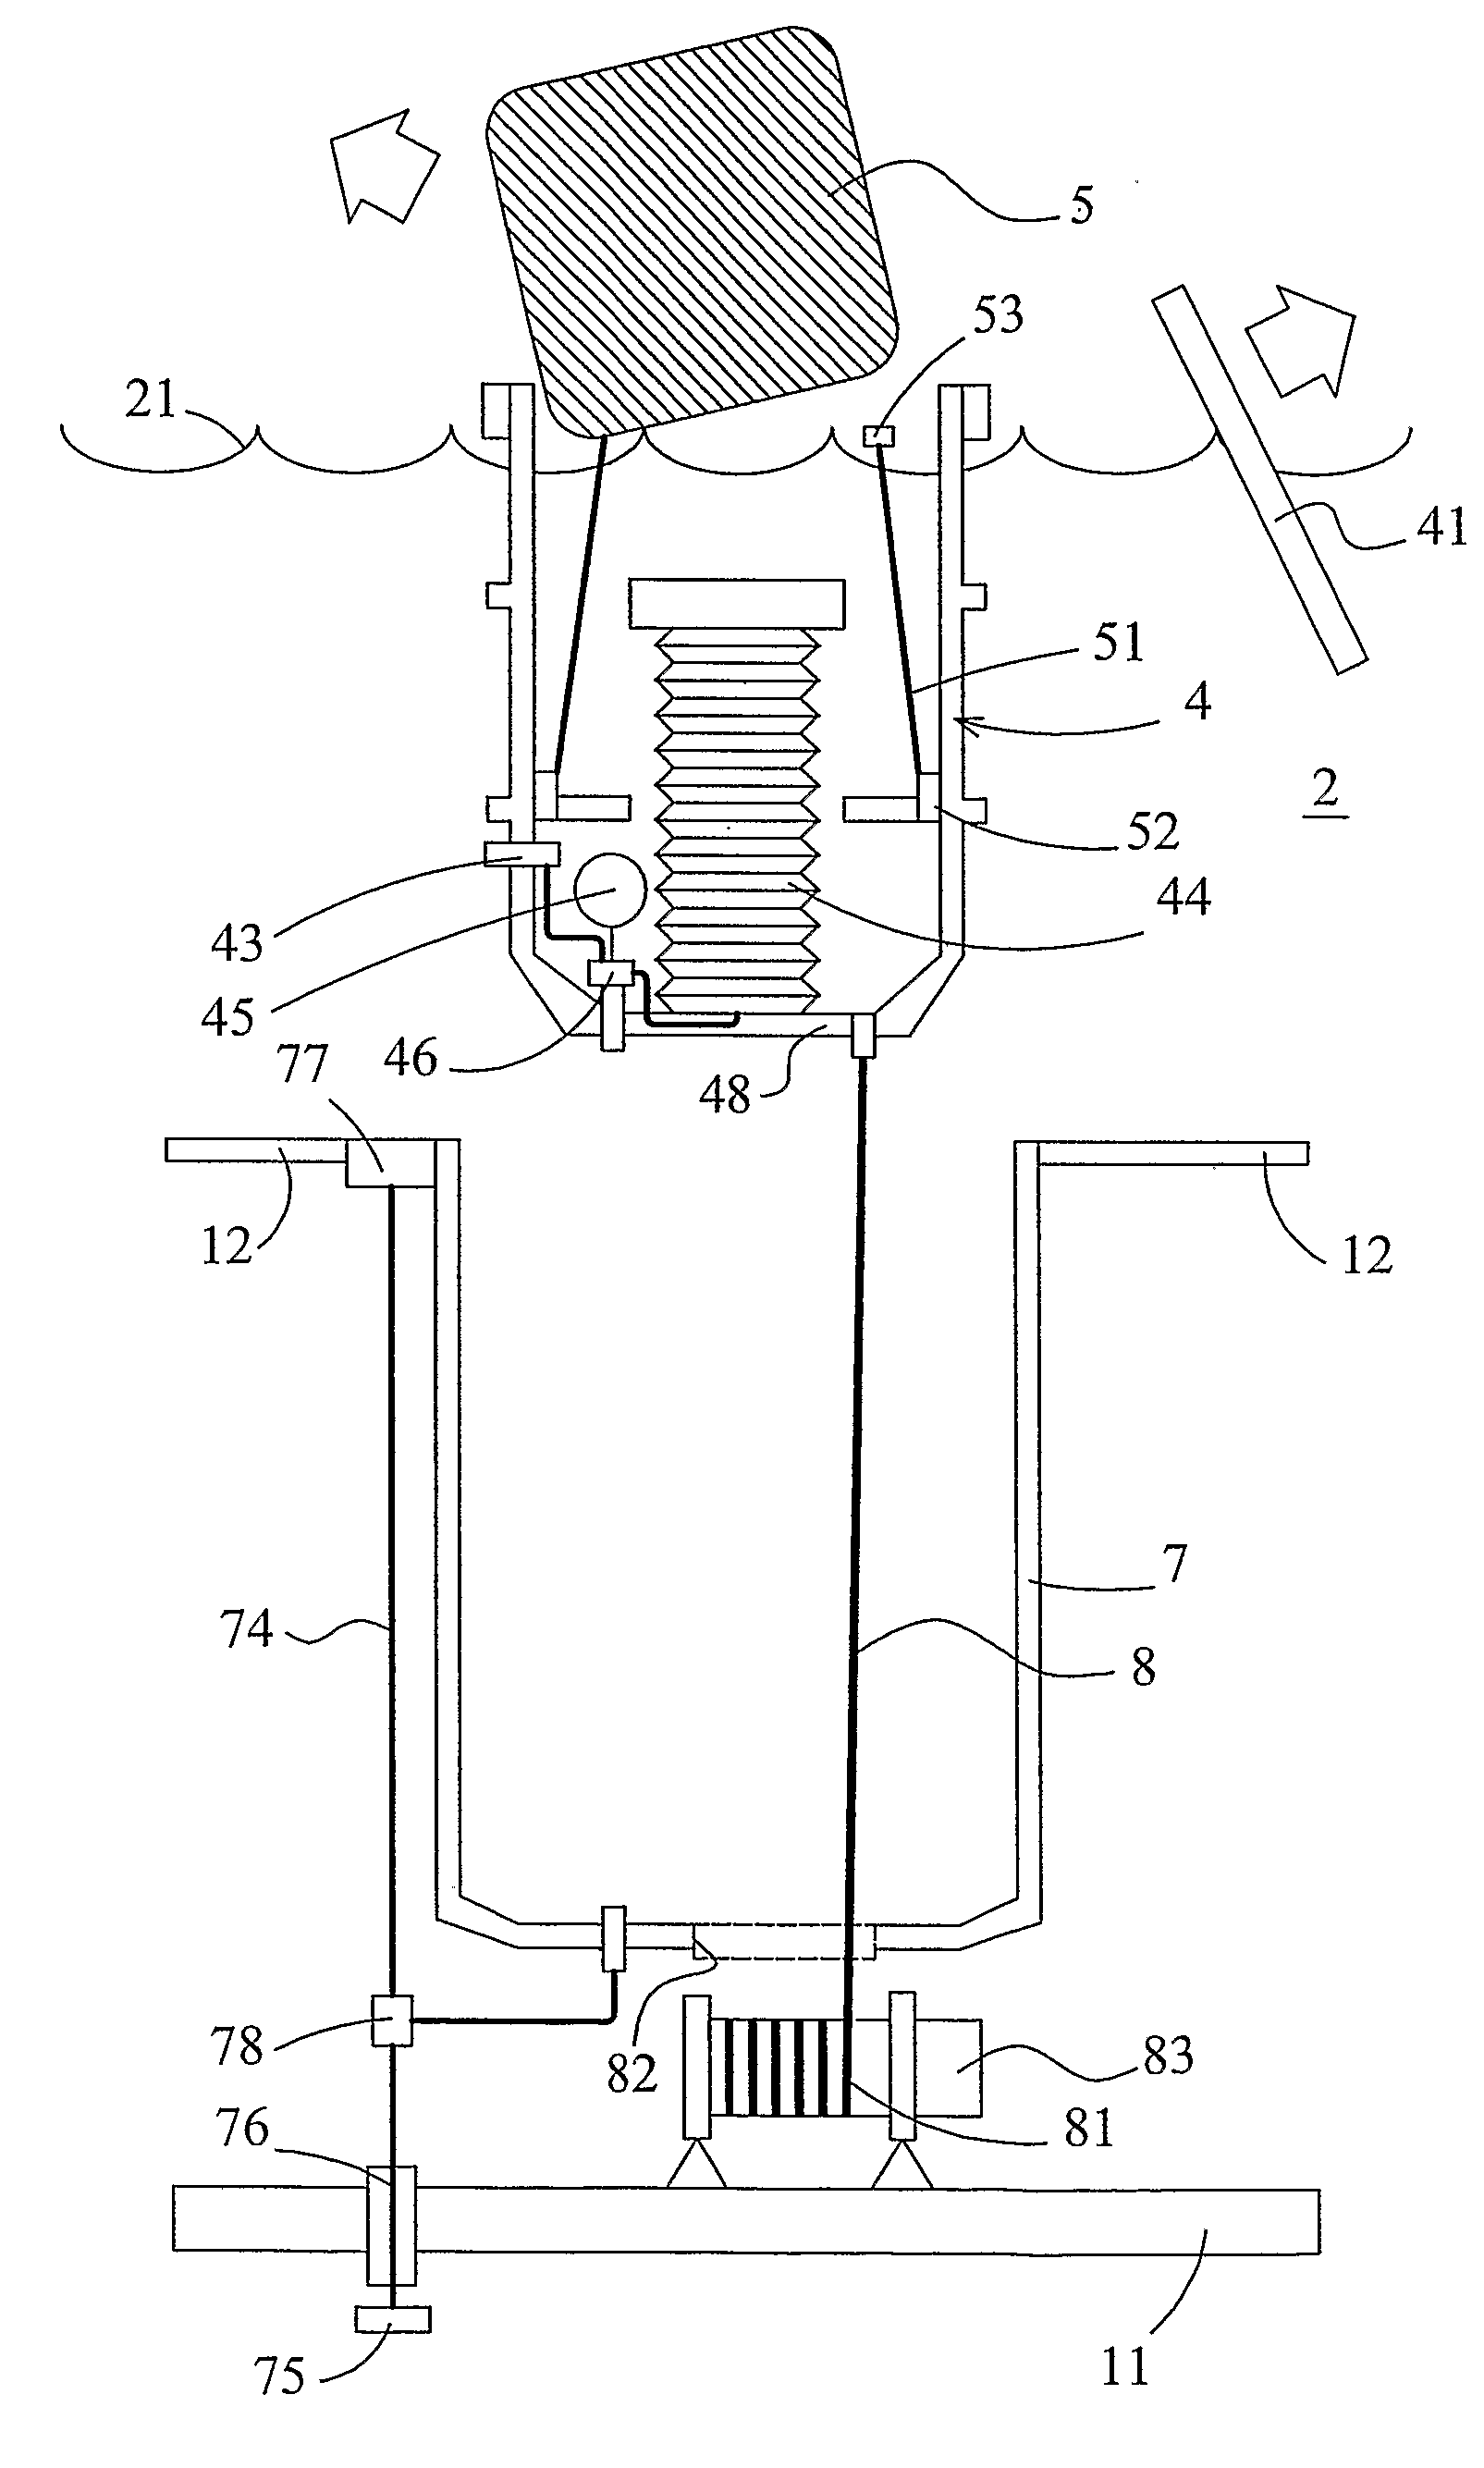 Assembly for Deploying a Payload from a Submarine